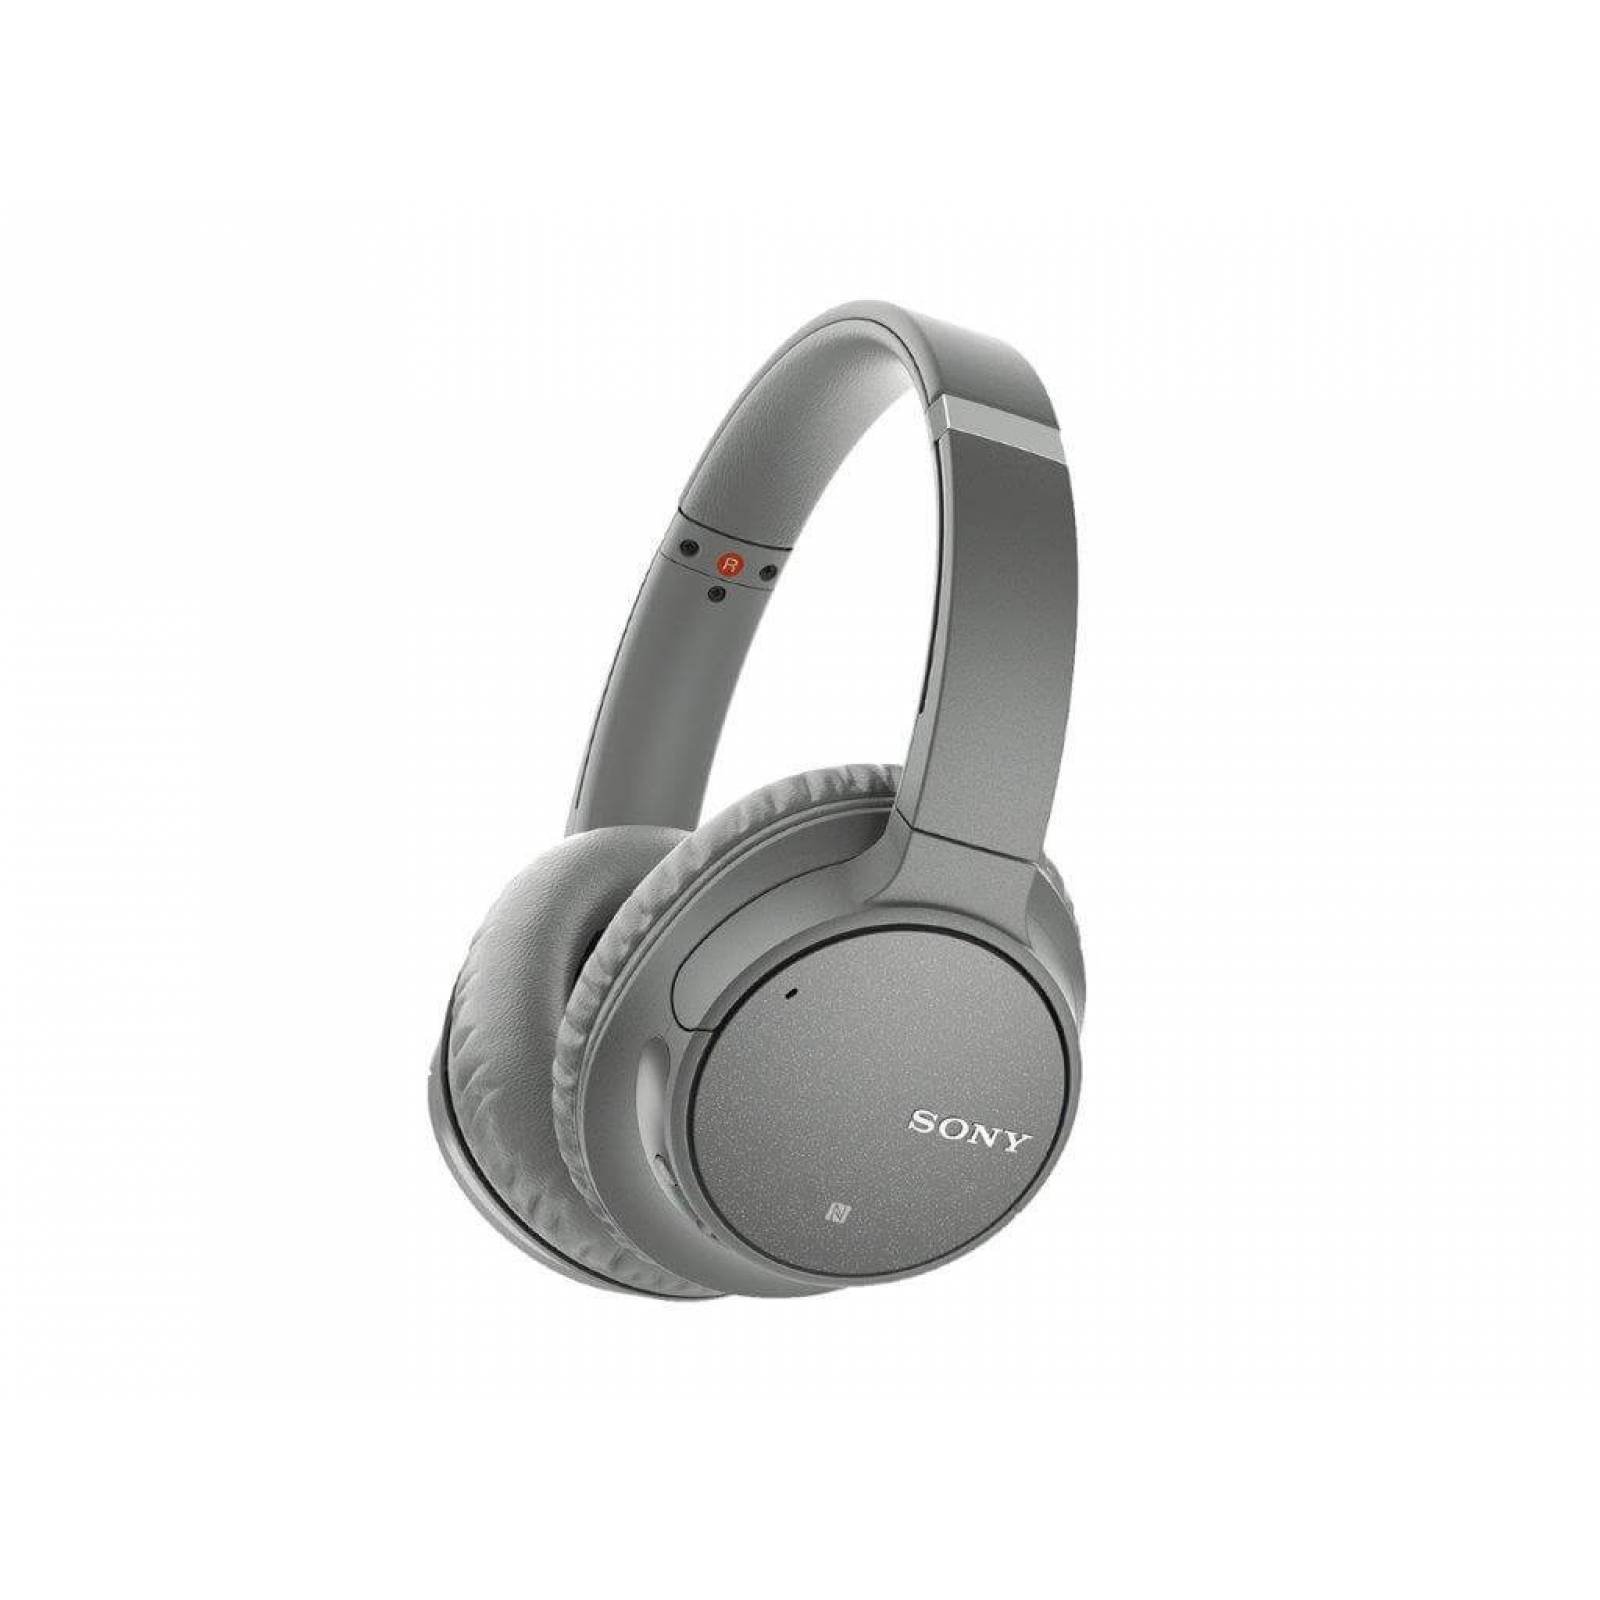 Audifonos inalambricos  Sony Bluetooth noise cancelling CH700N Gris